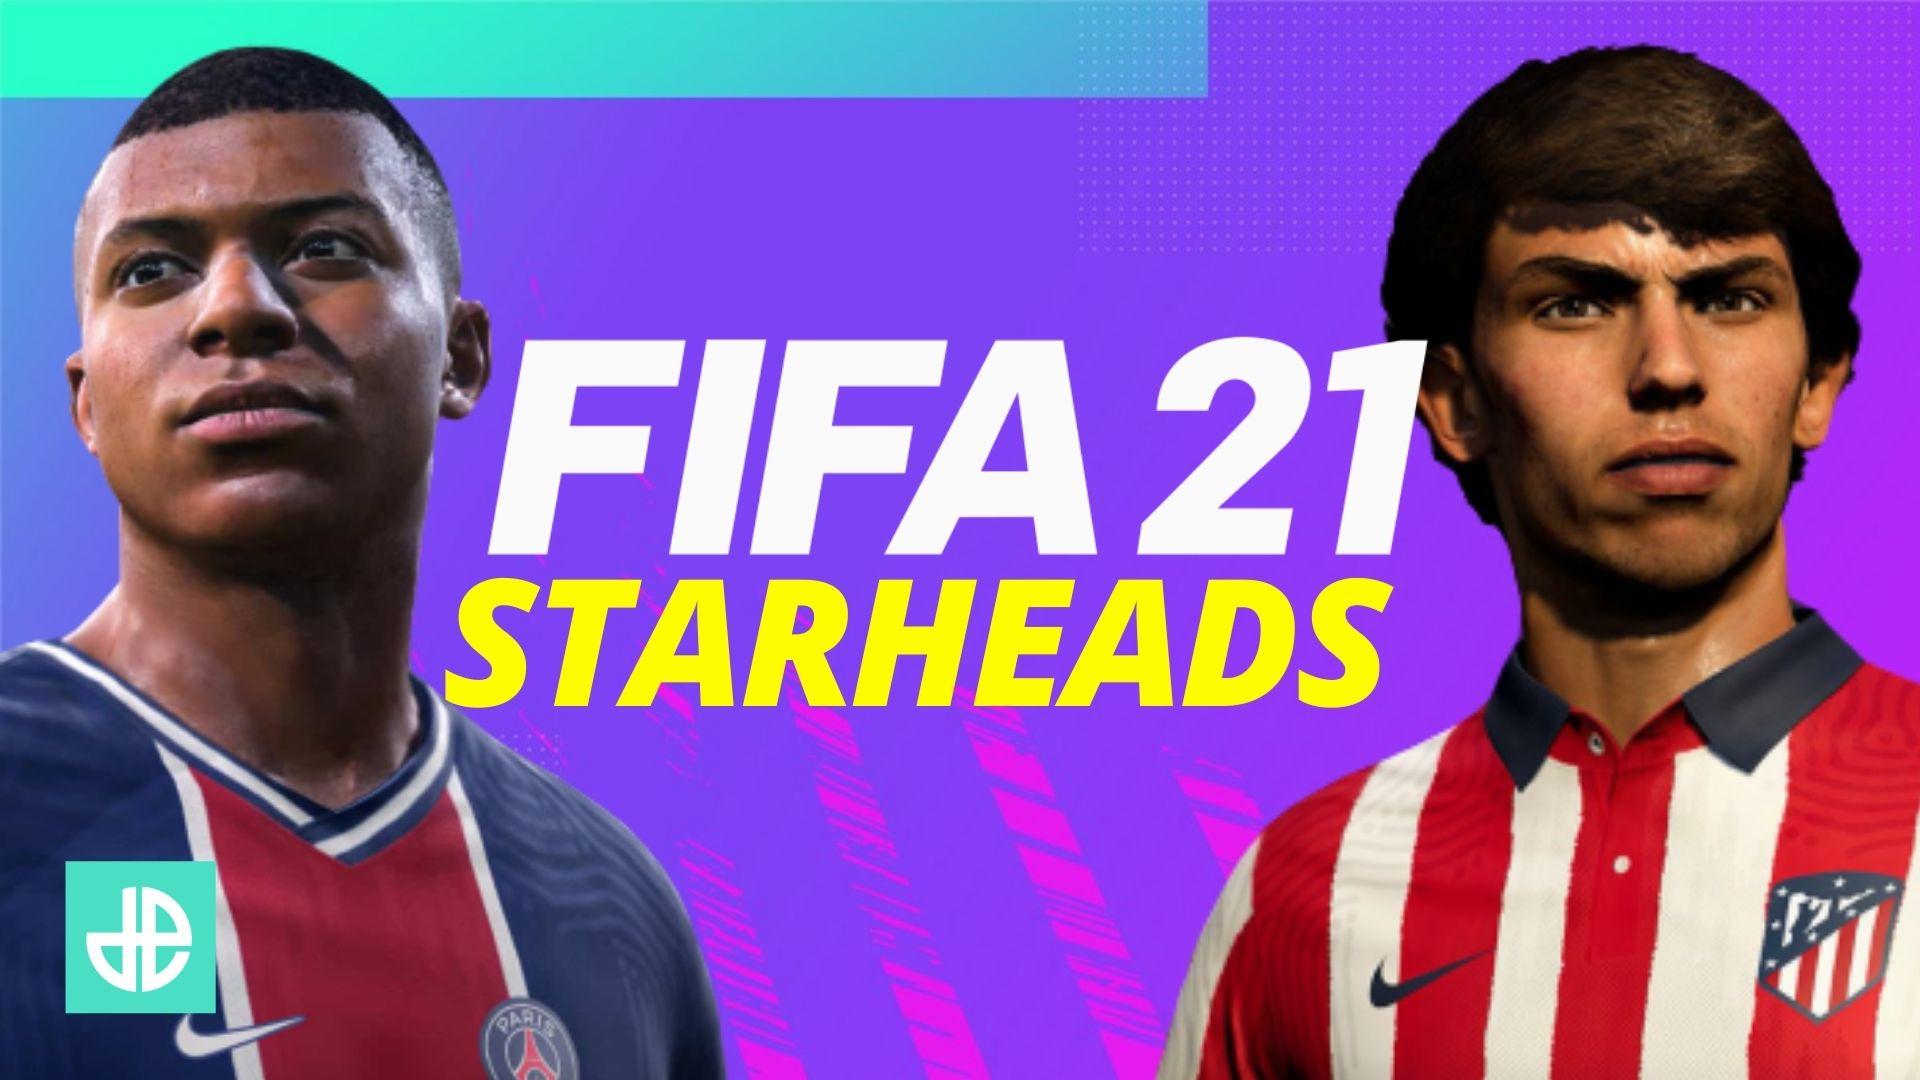 FIFA 21 star heads or face scans on Mbappe and Joao Felix